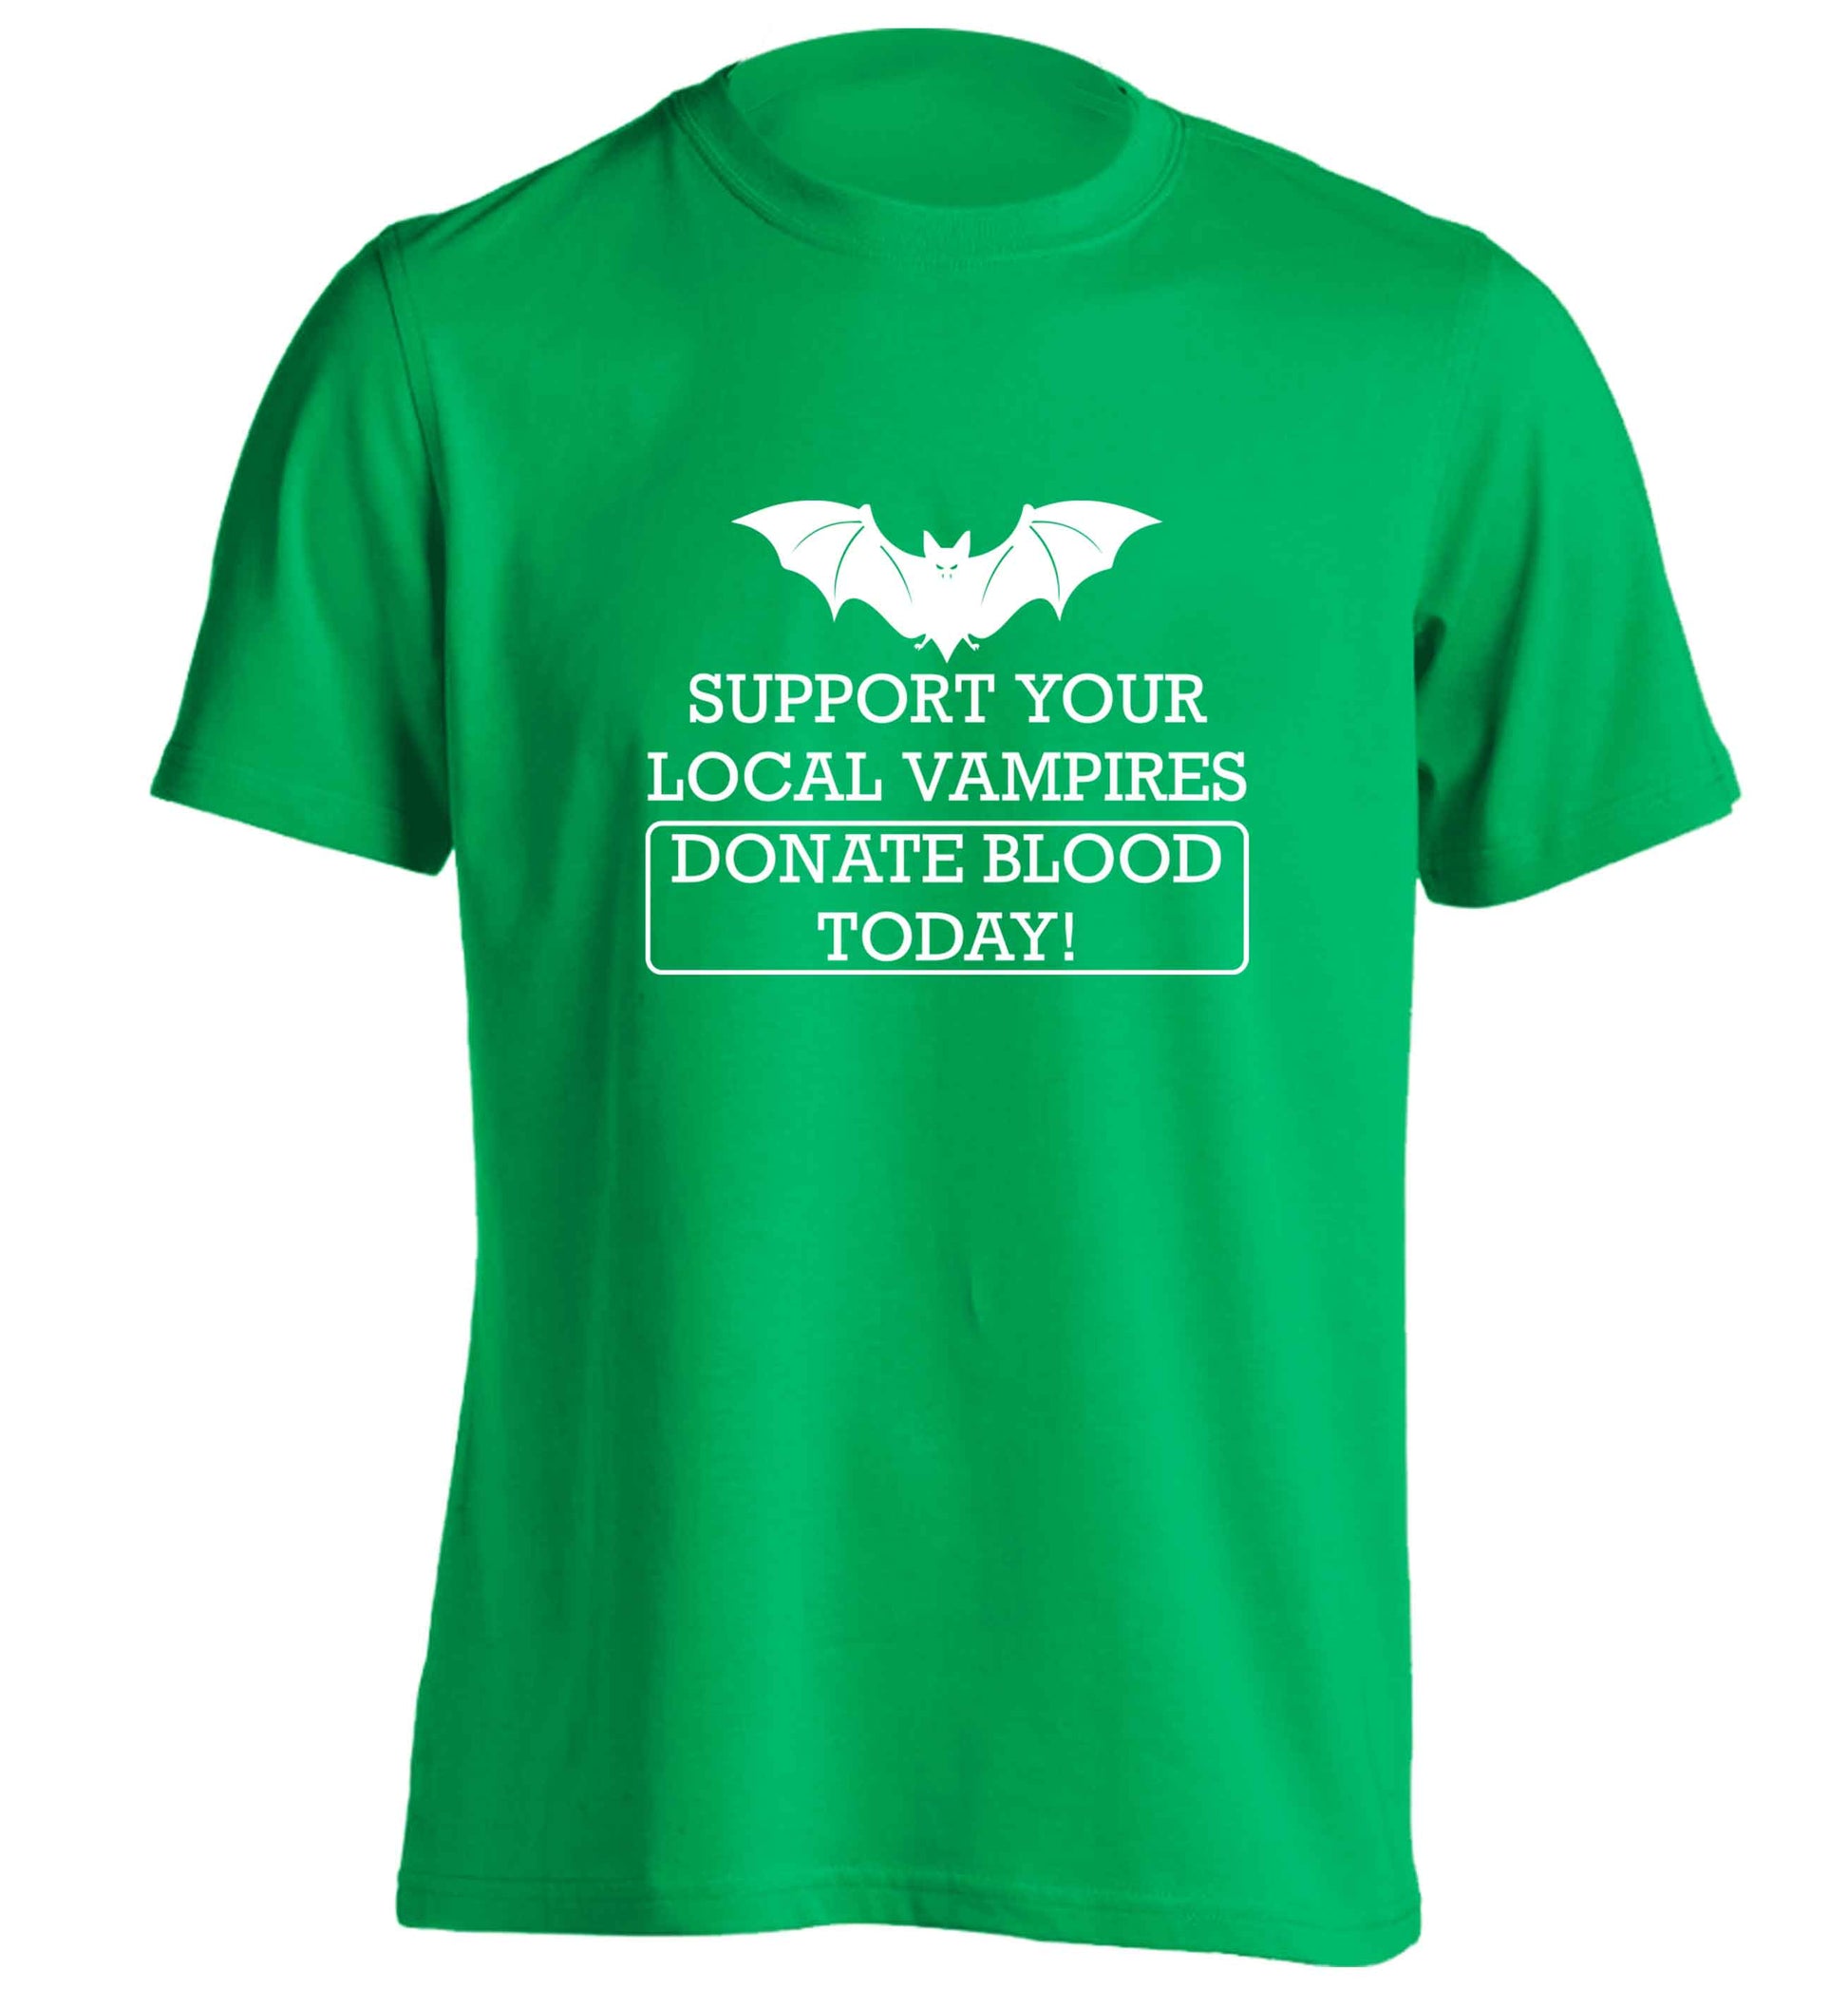 Support your local vampires donate blood today! adults unisex green Tshirt 2XL